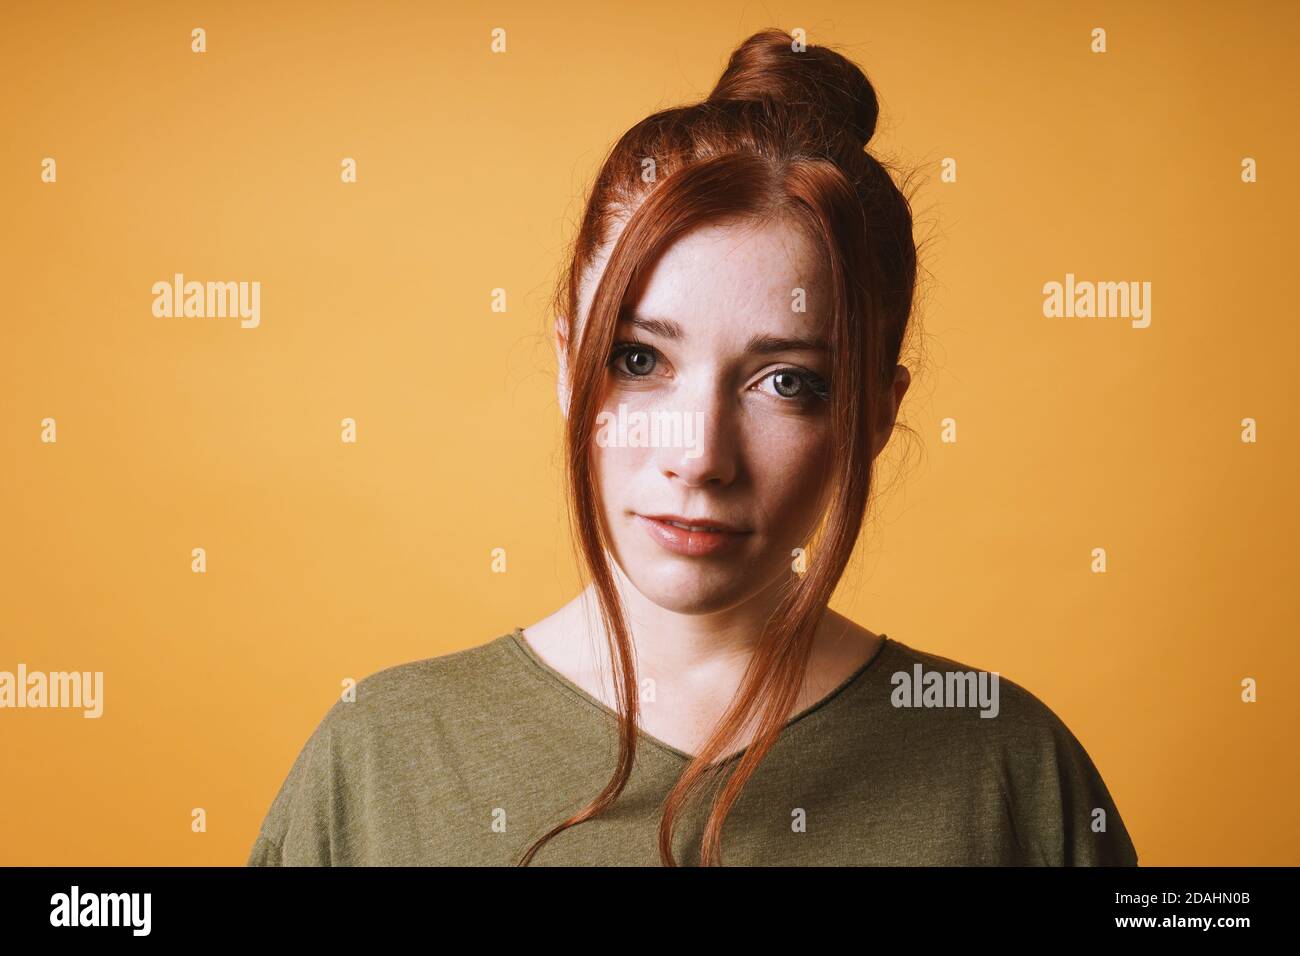 cool young woman with red hair messy bun hairstyle and loose strands at the front against yellow orange color background with opy space Stock Photo